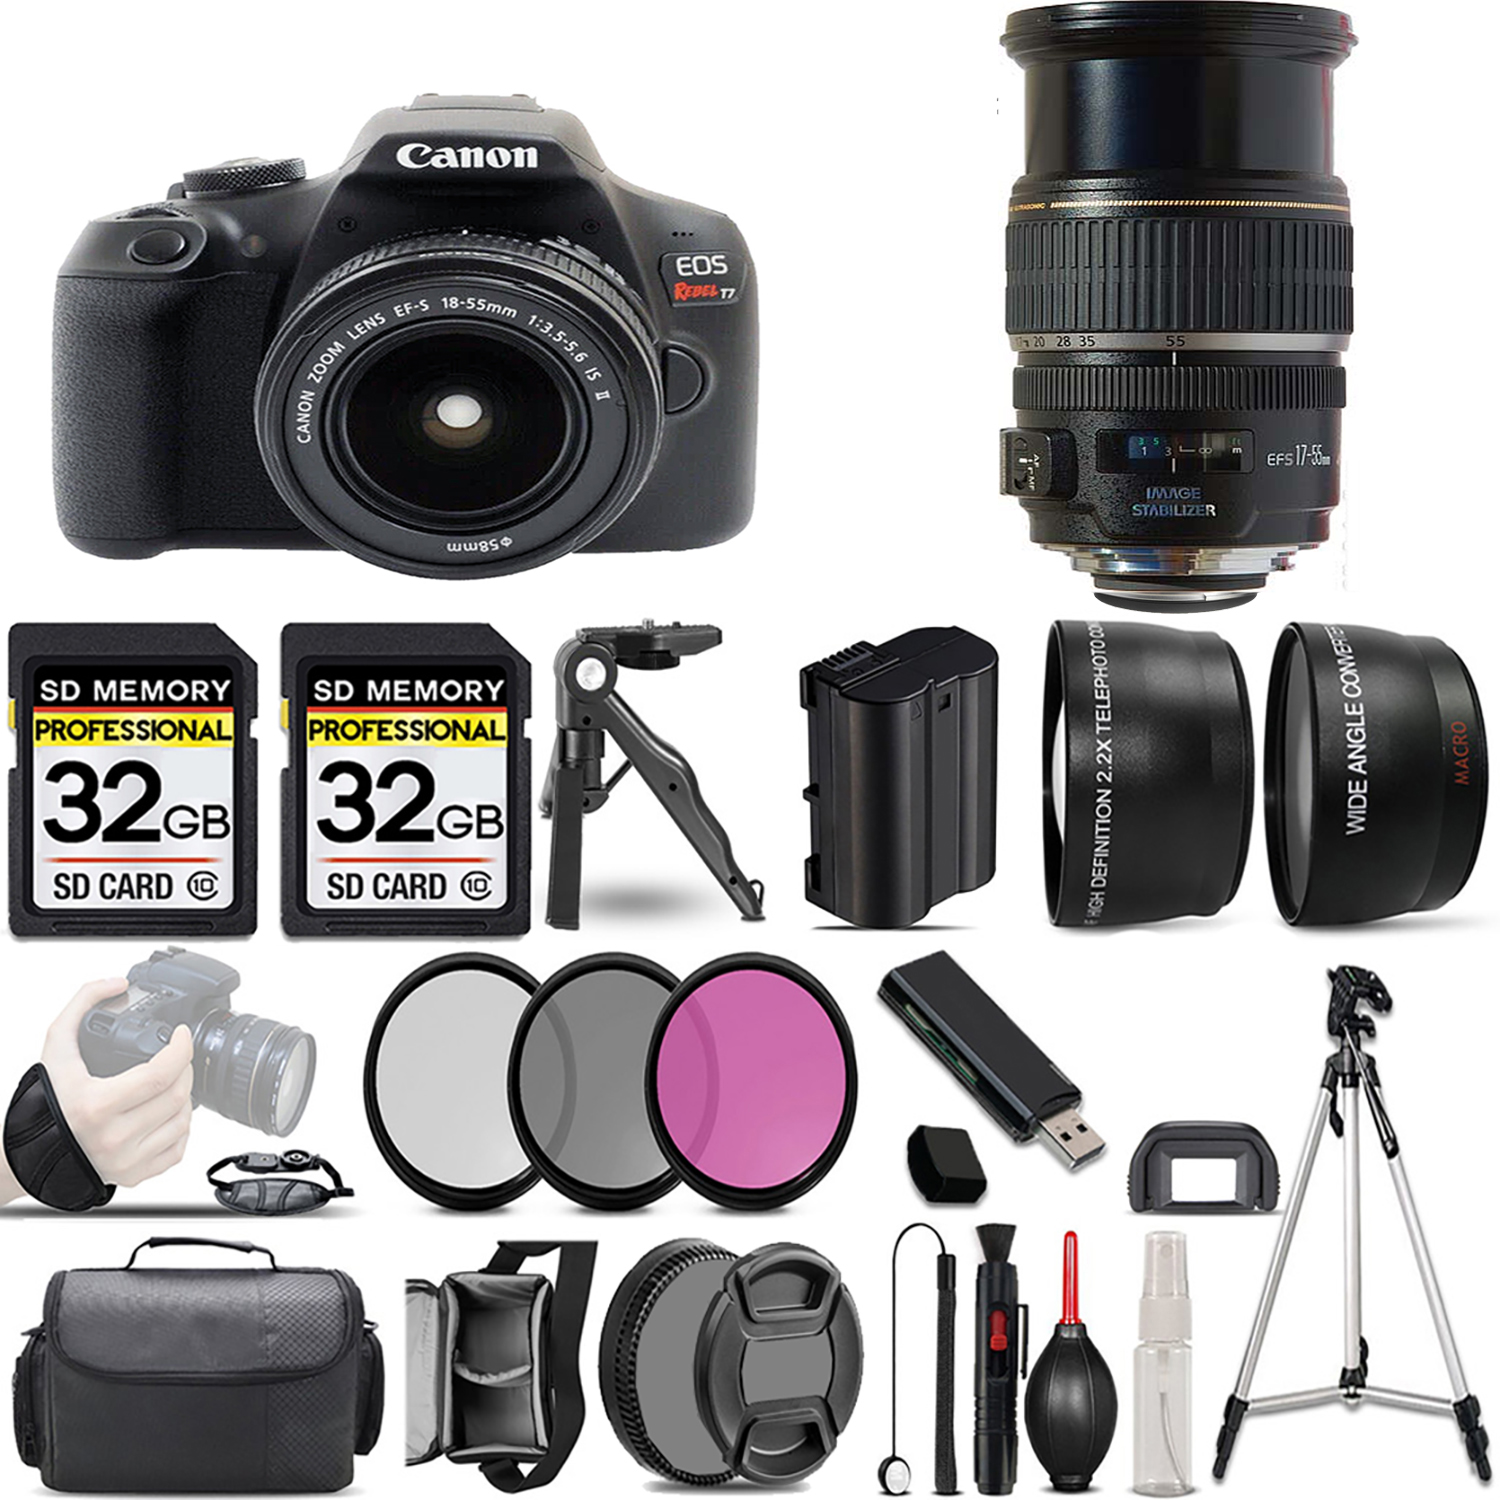 EOS Rebel T7 with 18-55mm Lens + 17-55mm f/2.8 IS USM Lens + 3 Piece Filter Set + 64GB *FREE SHIPPING*